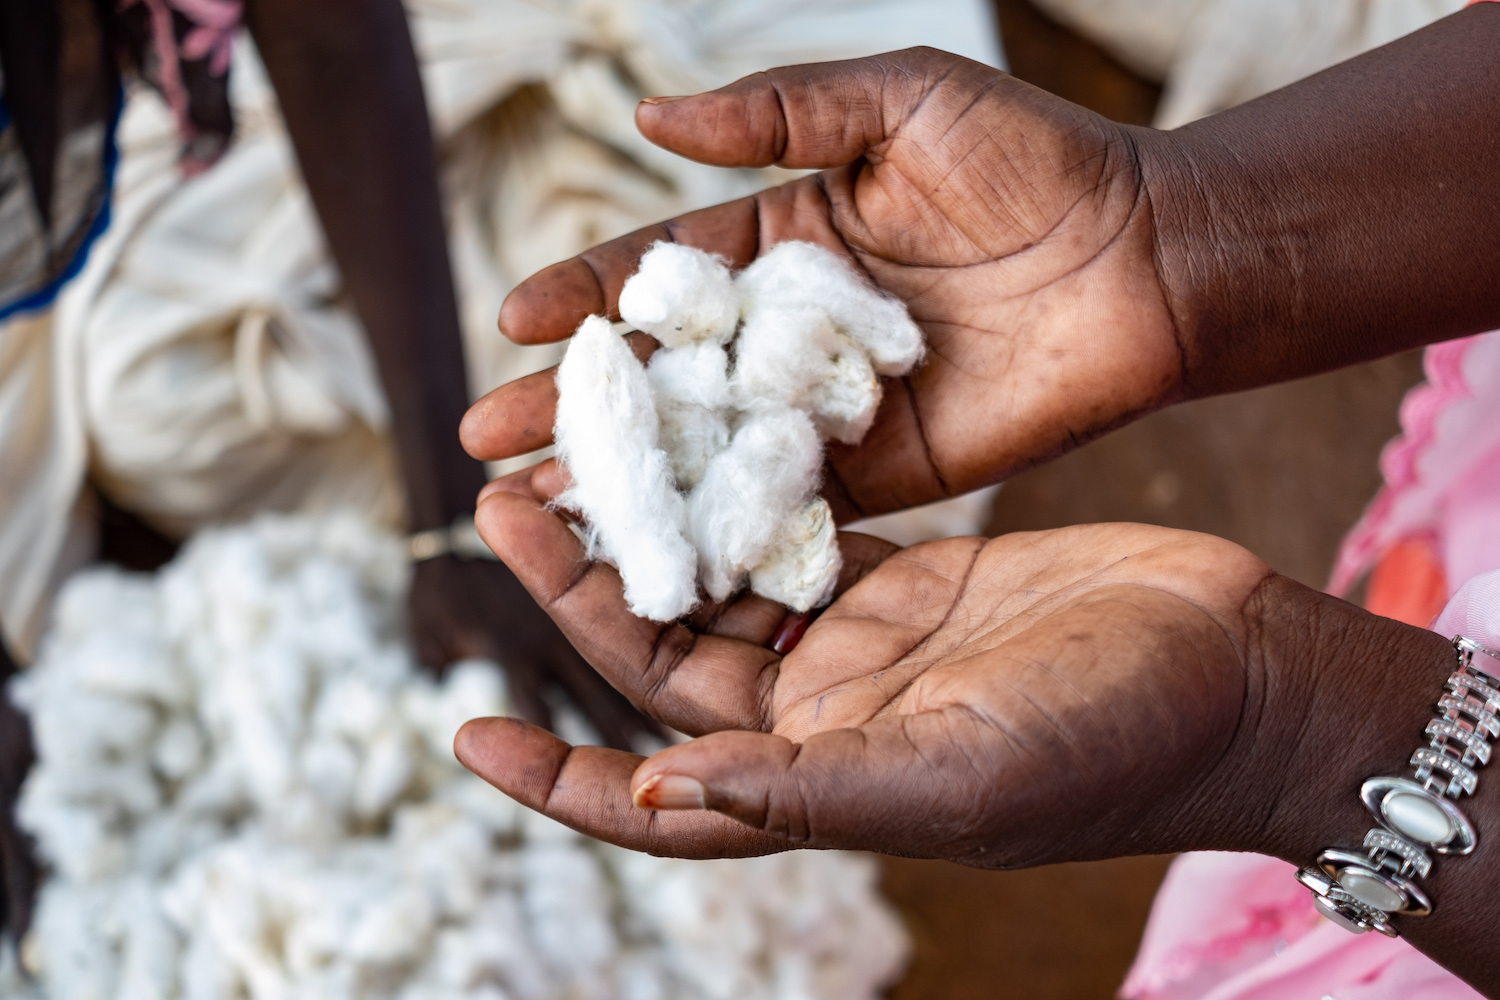 Egyptian Cotton Farmers To Receive Training and Support on How to Grow  Egyptian Cotton More Sustainably